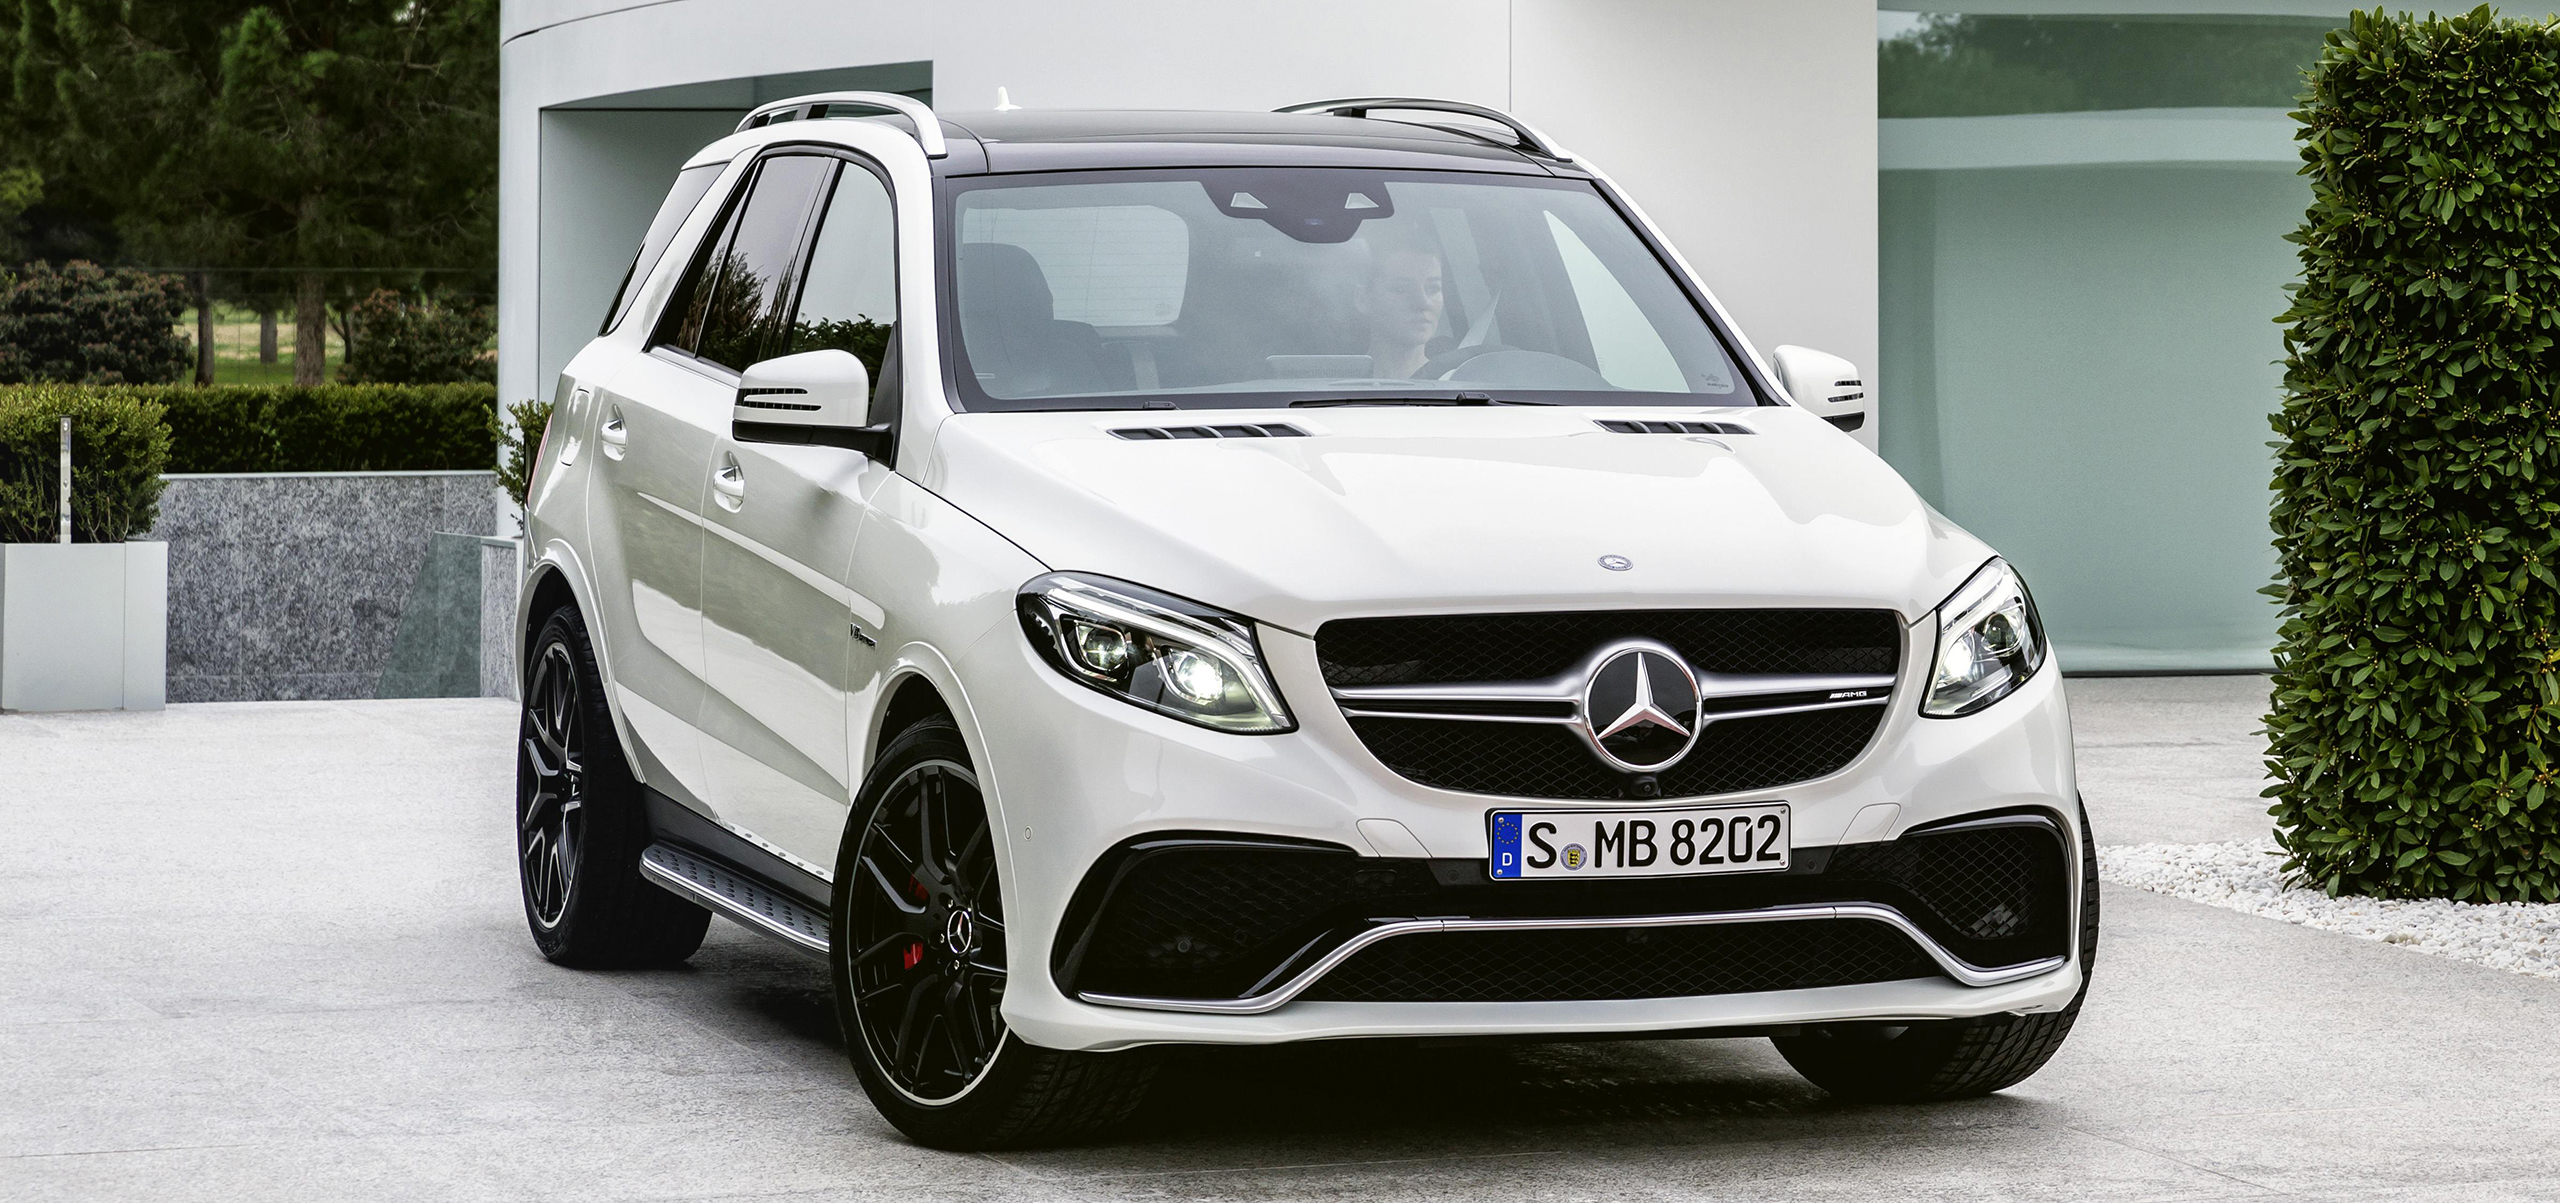 Mercedes-AMG GLE 63 revealed ahead of NY debut - 5.5 litre twin-turbo V8 wi...